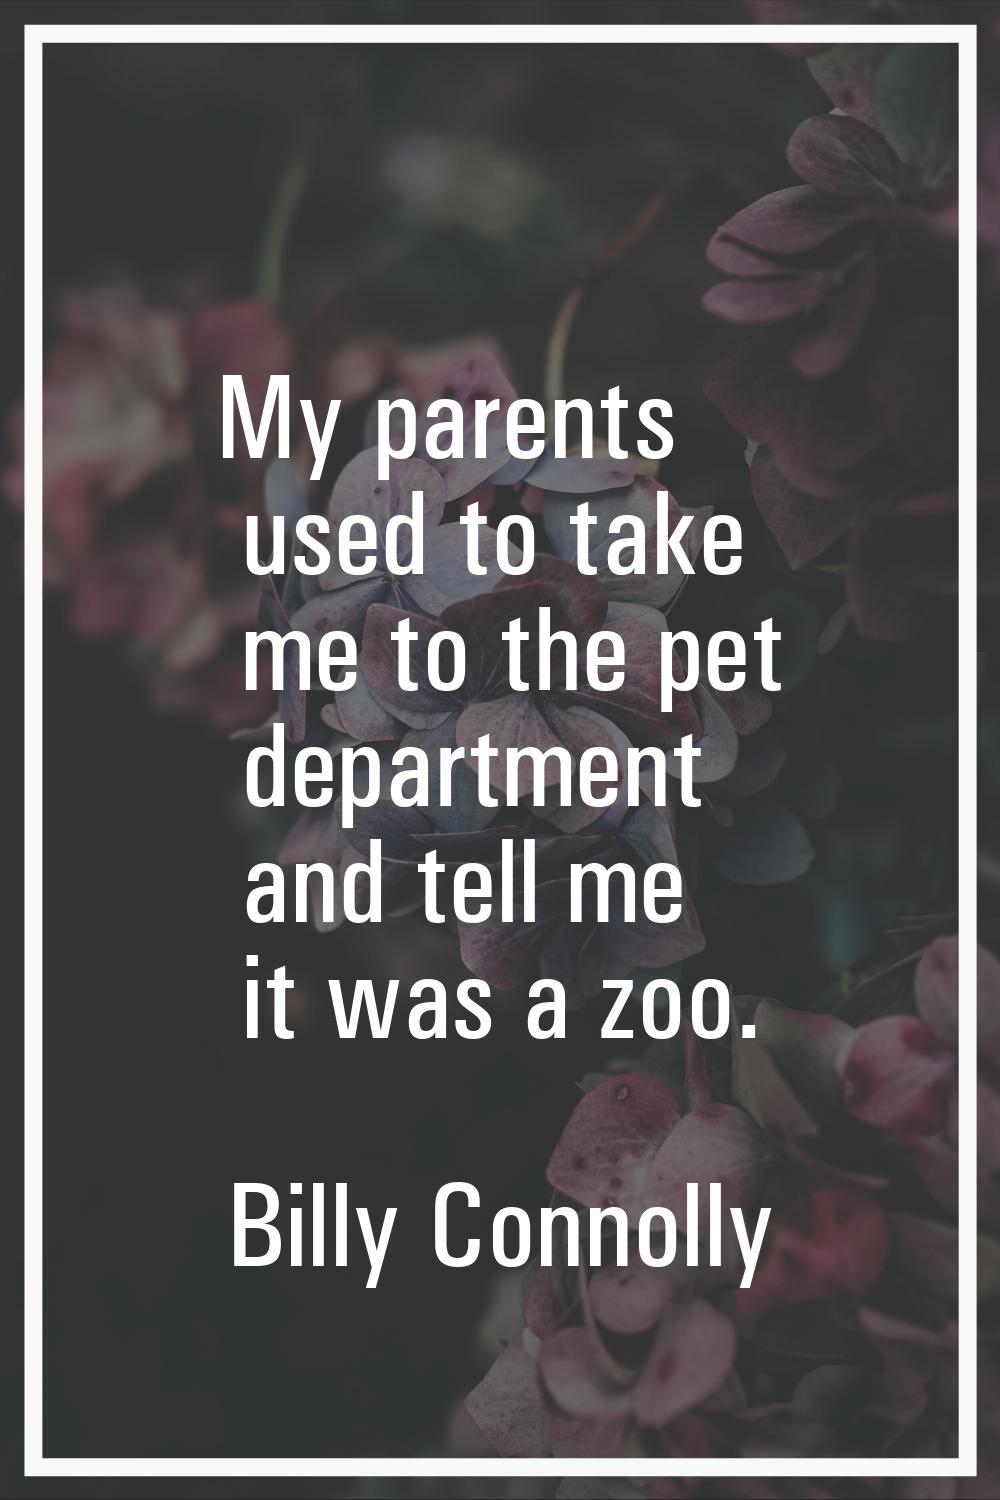 My parents used to take me to the pet department and tell me it was a zoo.